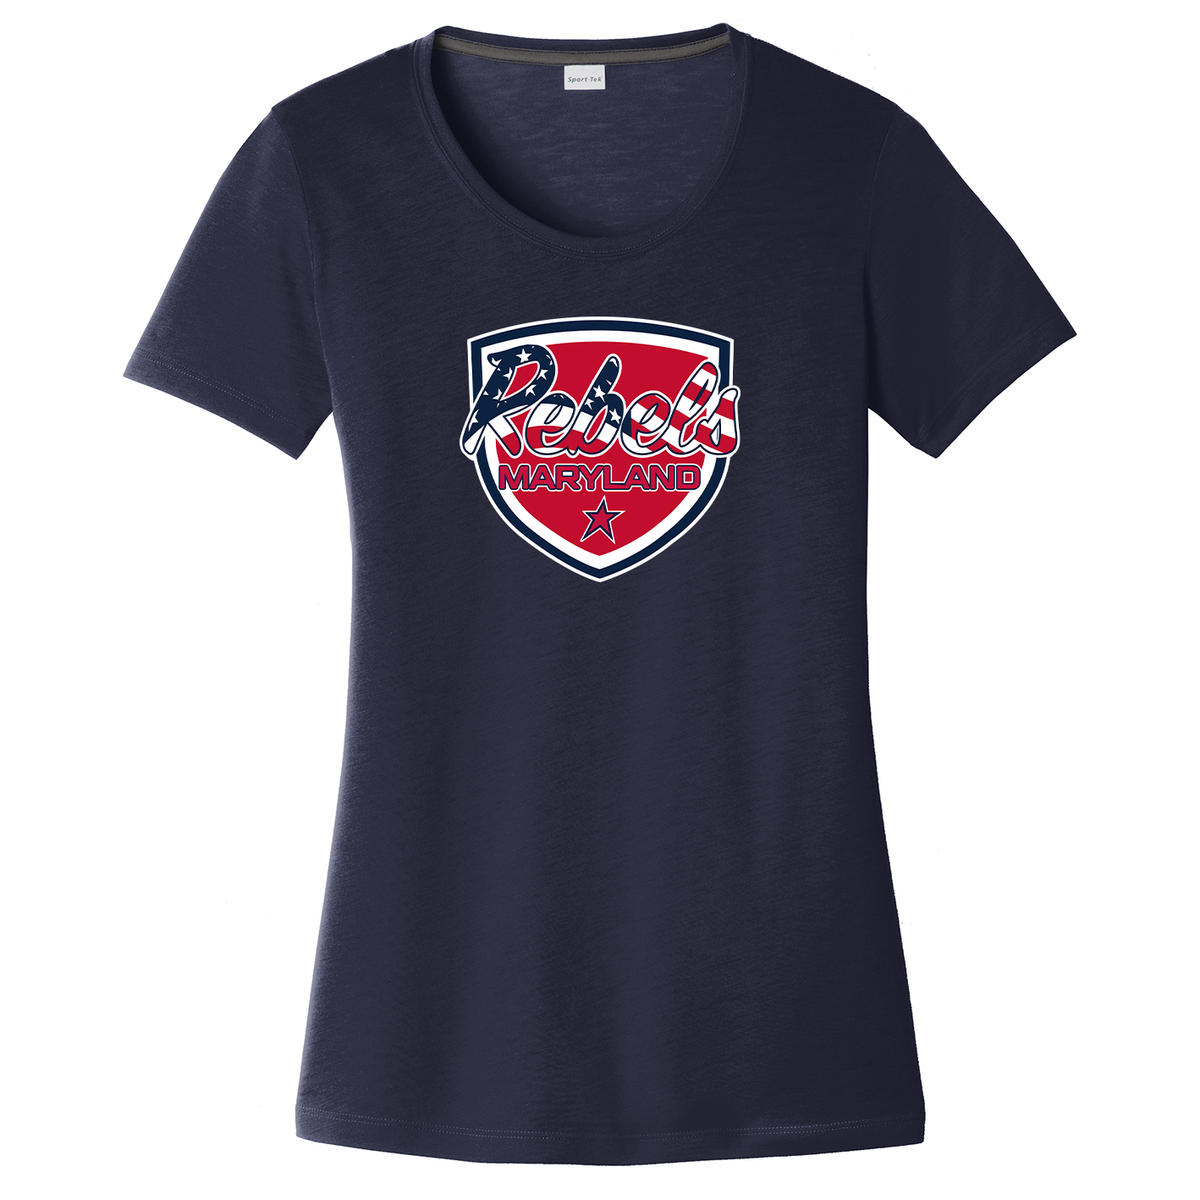 Rebels Maryland Women's CottonTouch Performance T-Shirt